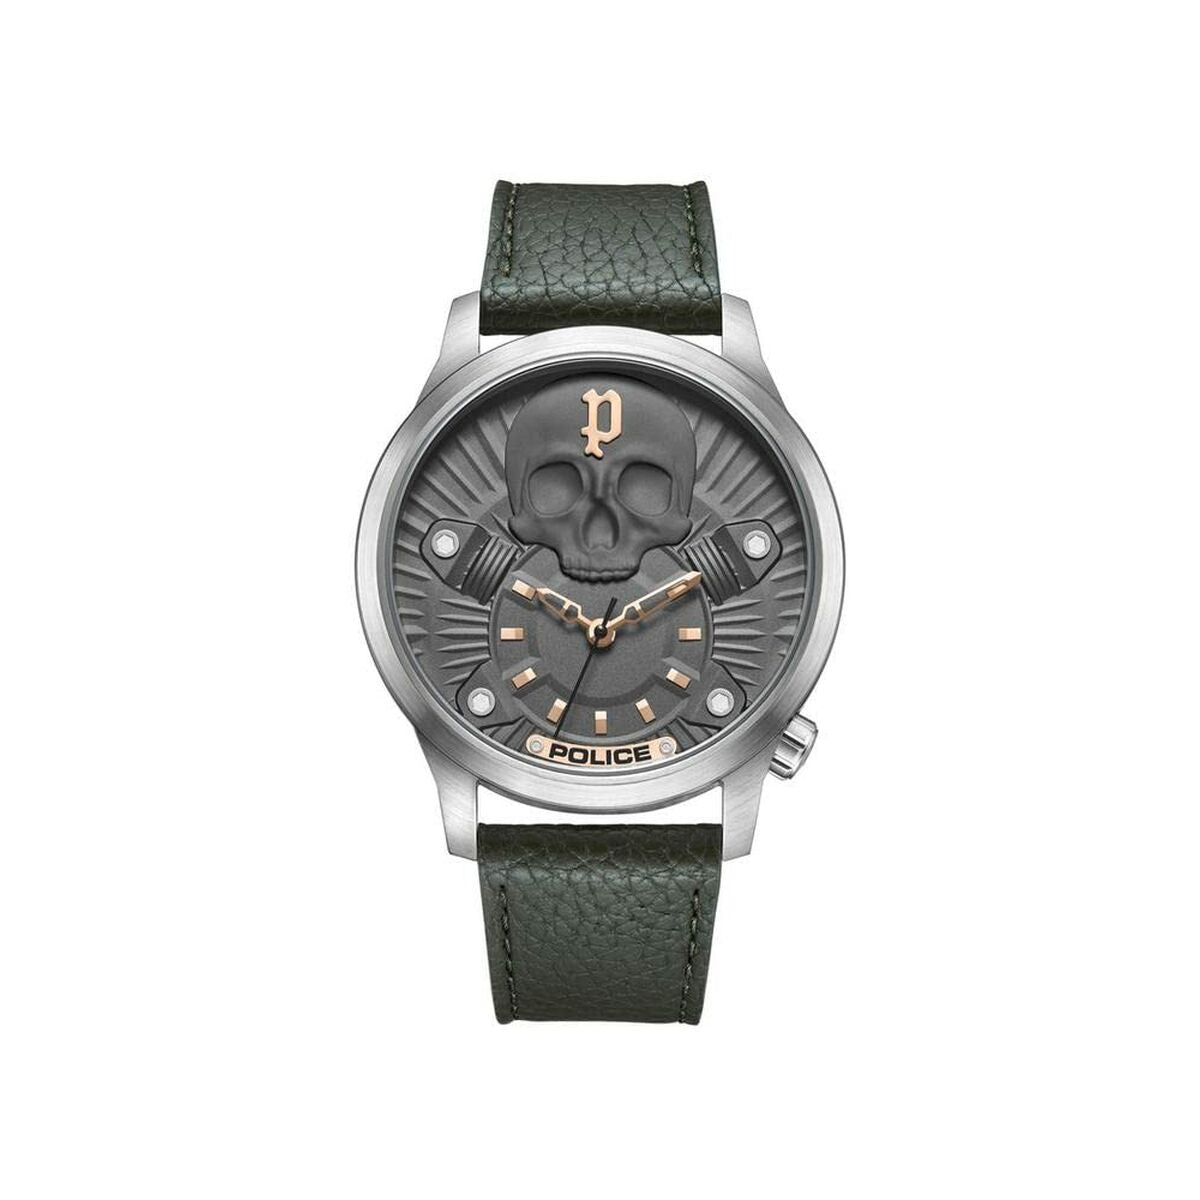 Men's Watch Police (Ø 46 mm), Police, Watches, Men, mens-watch-police-o-46-mm, Brand_Police, category-reference-2570, category-reference-2635, category-reference-2994, category-reference-2996, category-reference-t-19667, category-reference-t-19724, category-reference-t-20349, Condition_NEW, fashion, original gifts, Price_50 - 100, RiotNook